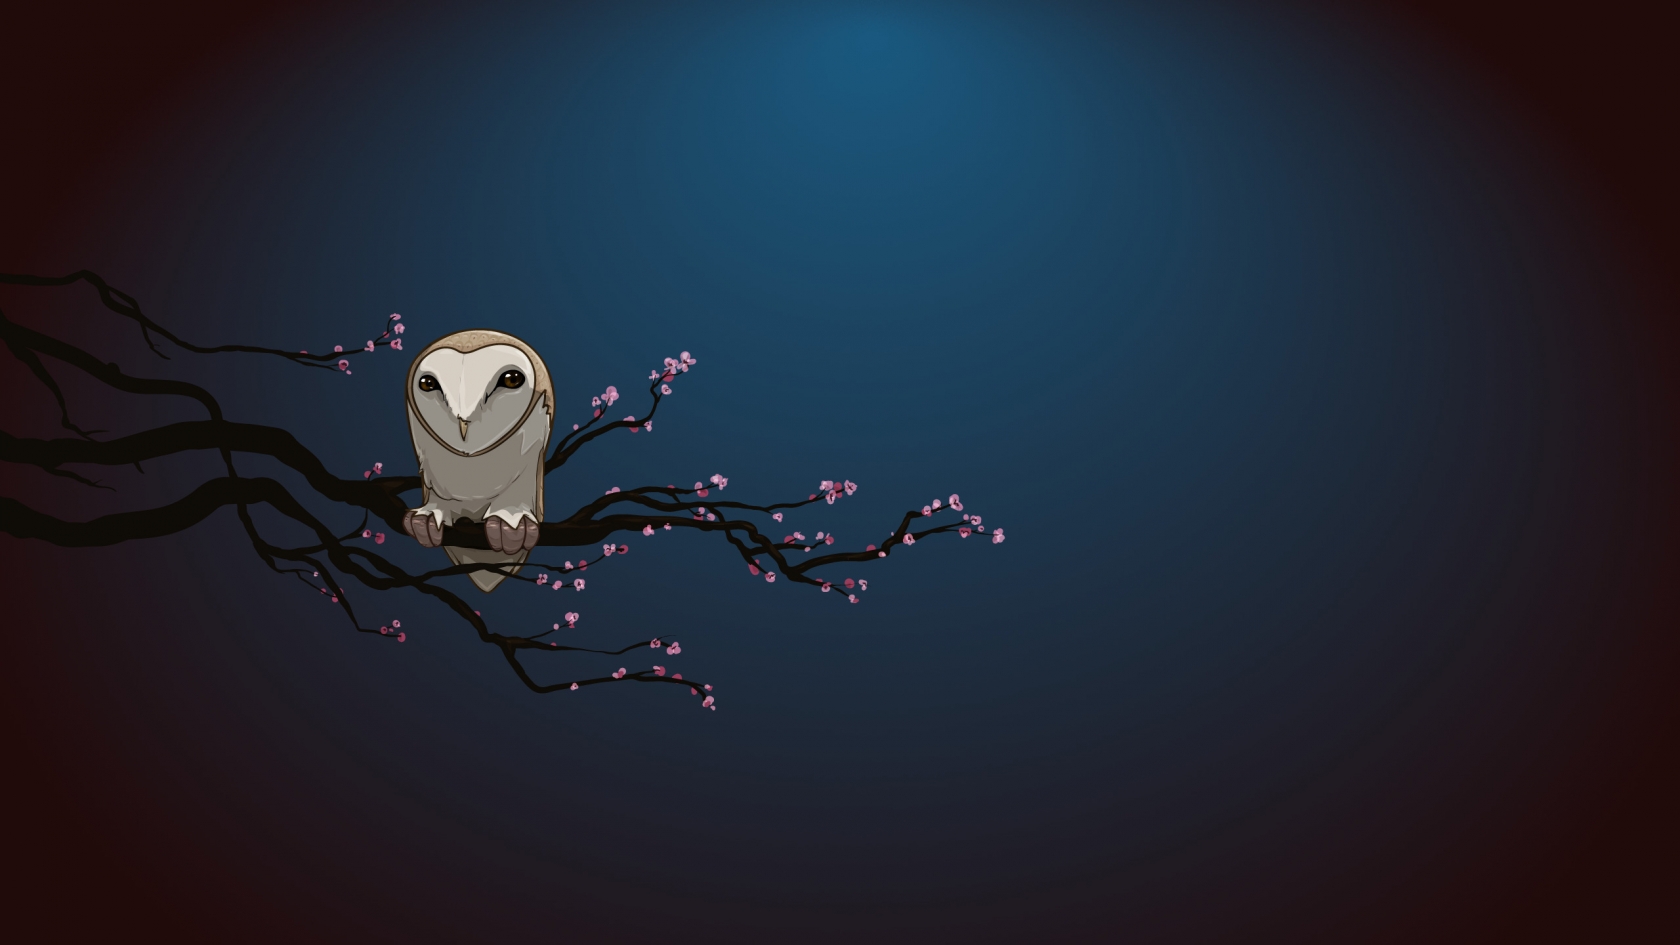 Owl Alone for 1680 x 945 HDTV resolution